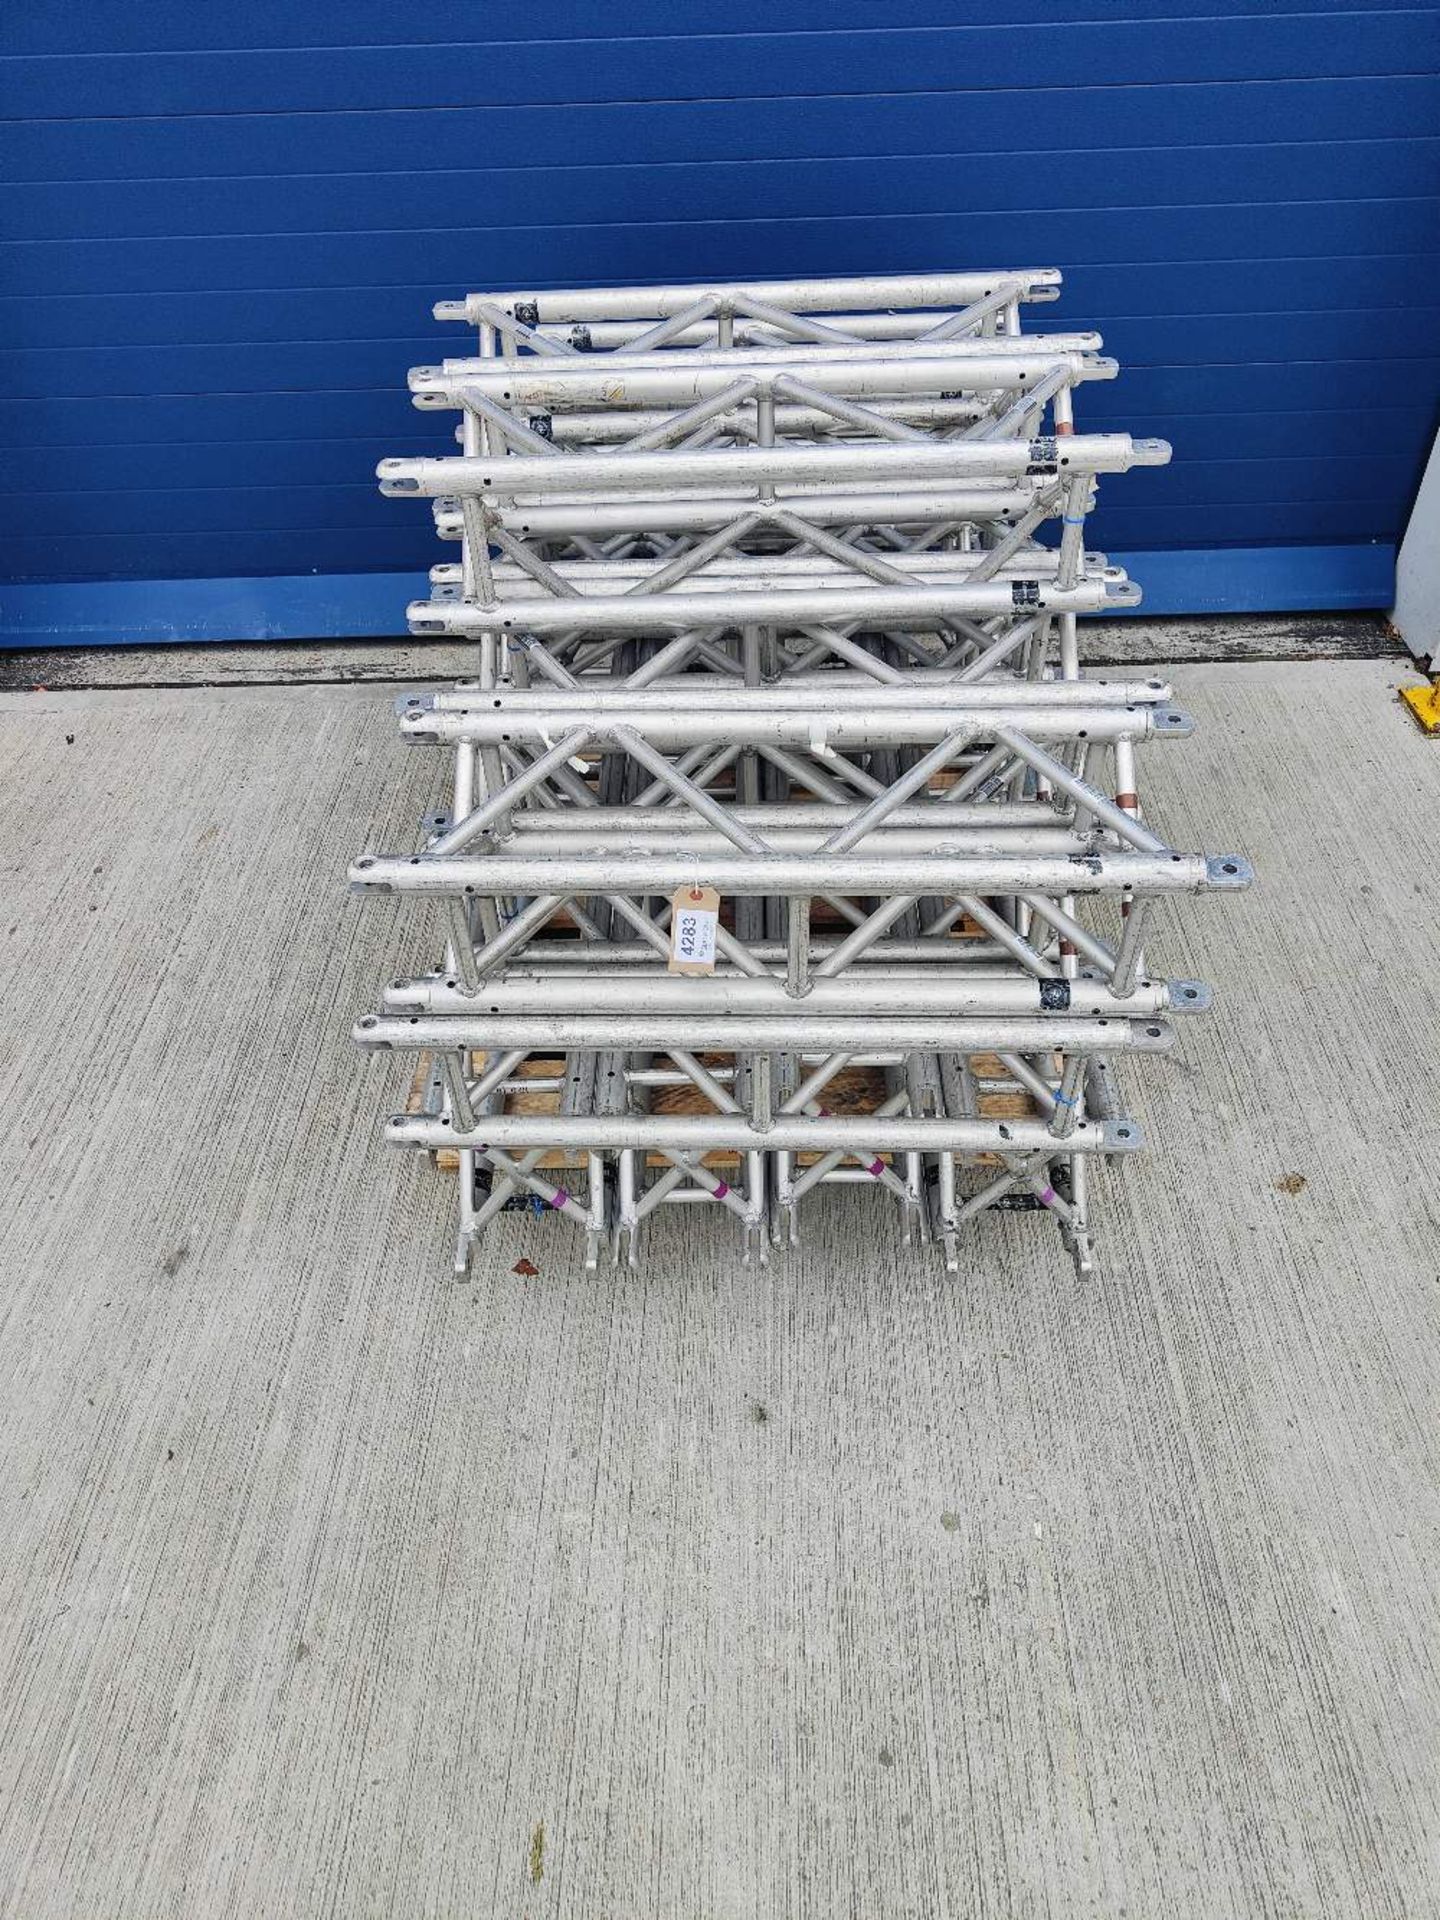 Quantity of Slick Minibeam 6ft and 1m Truss Sections - Image 4 of 5